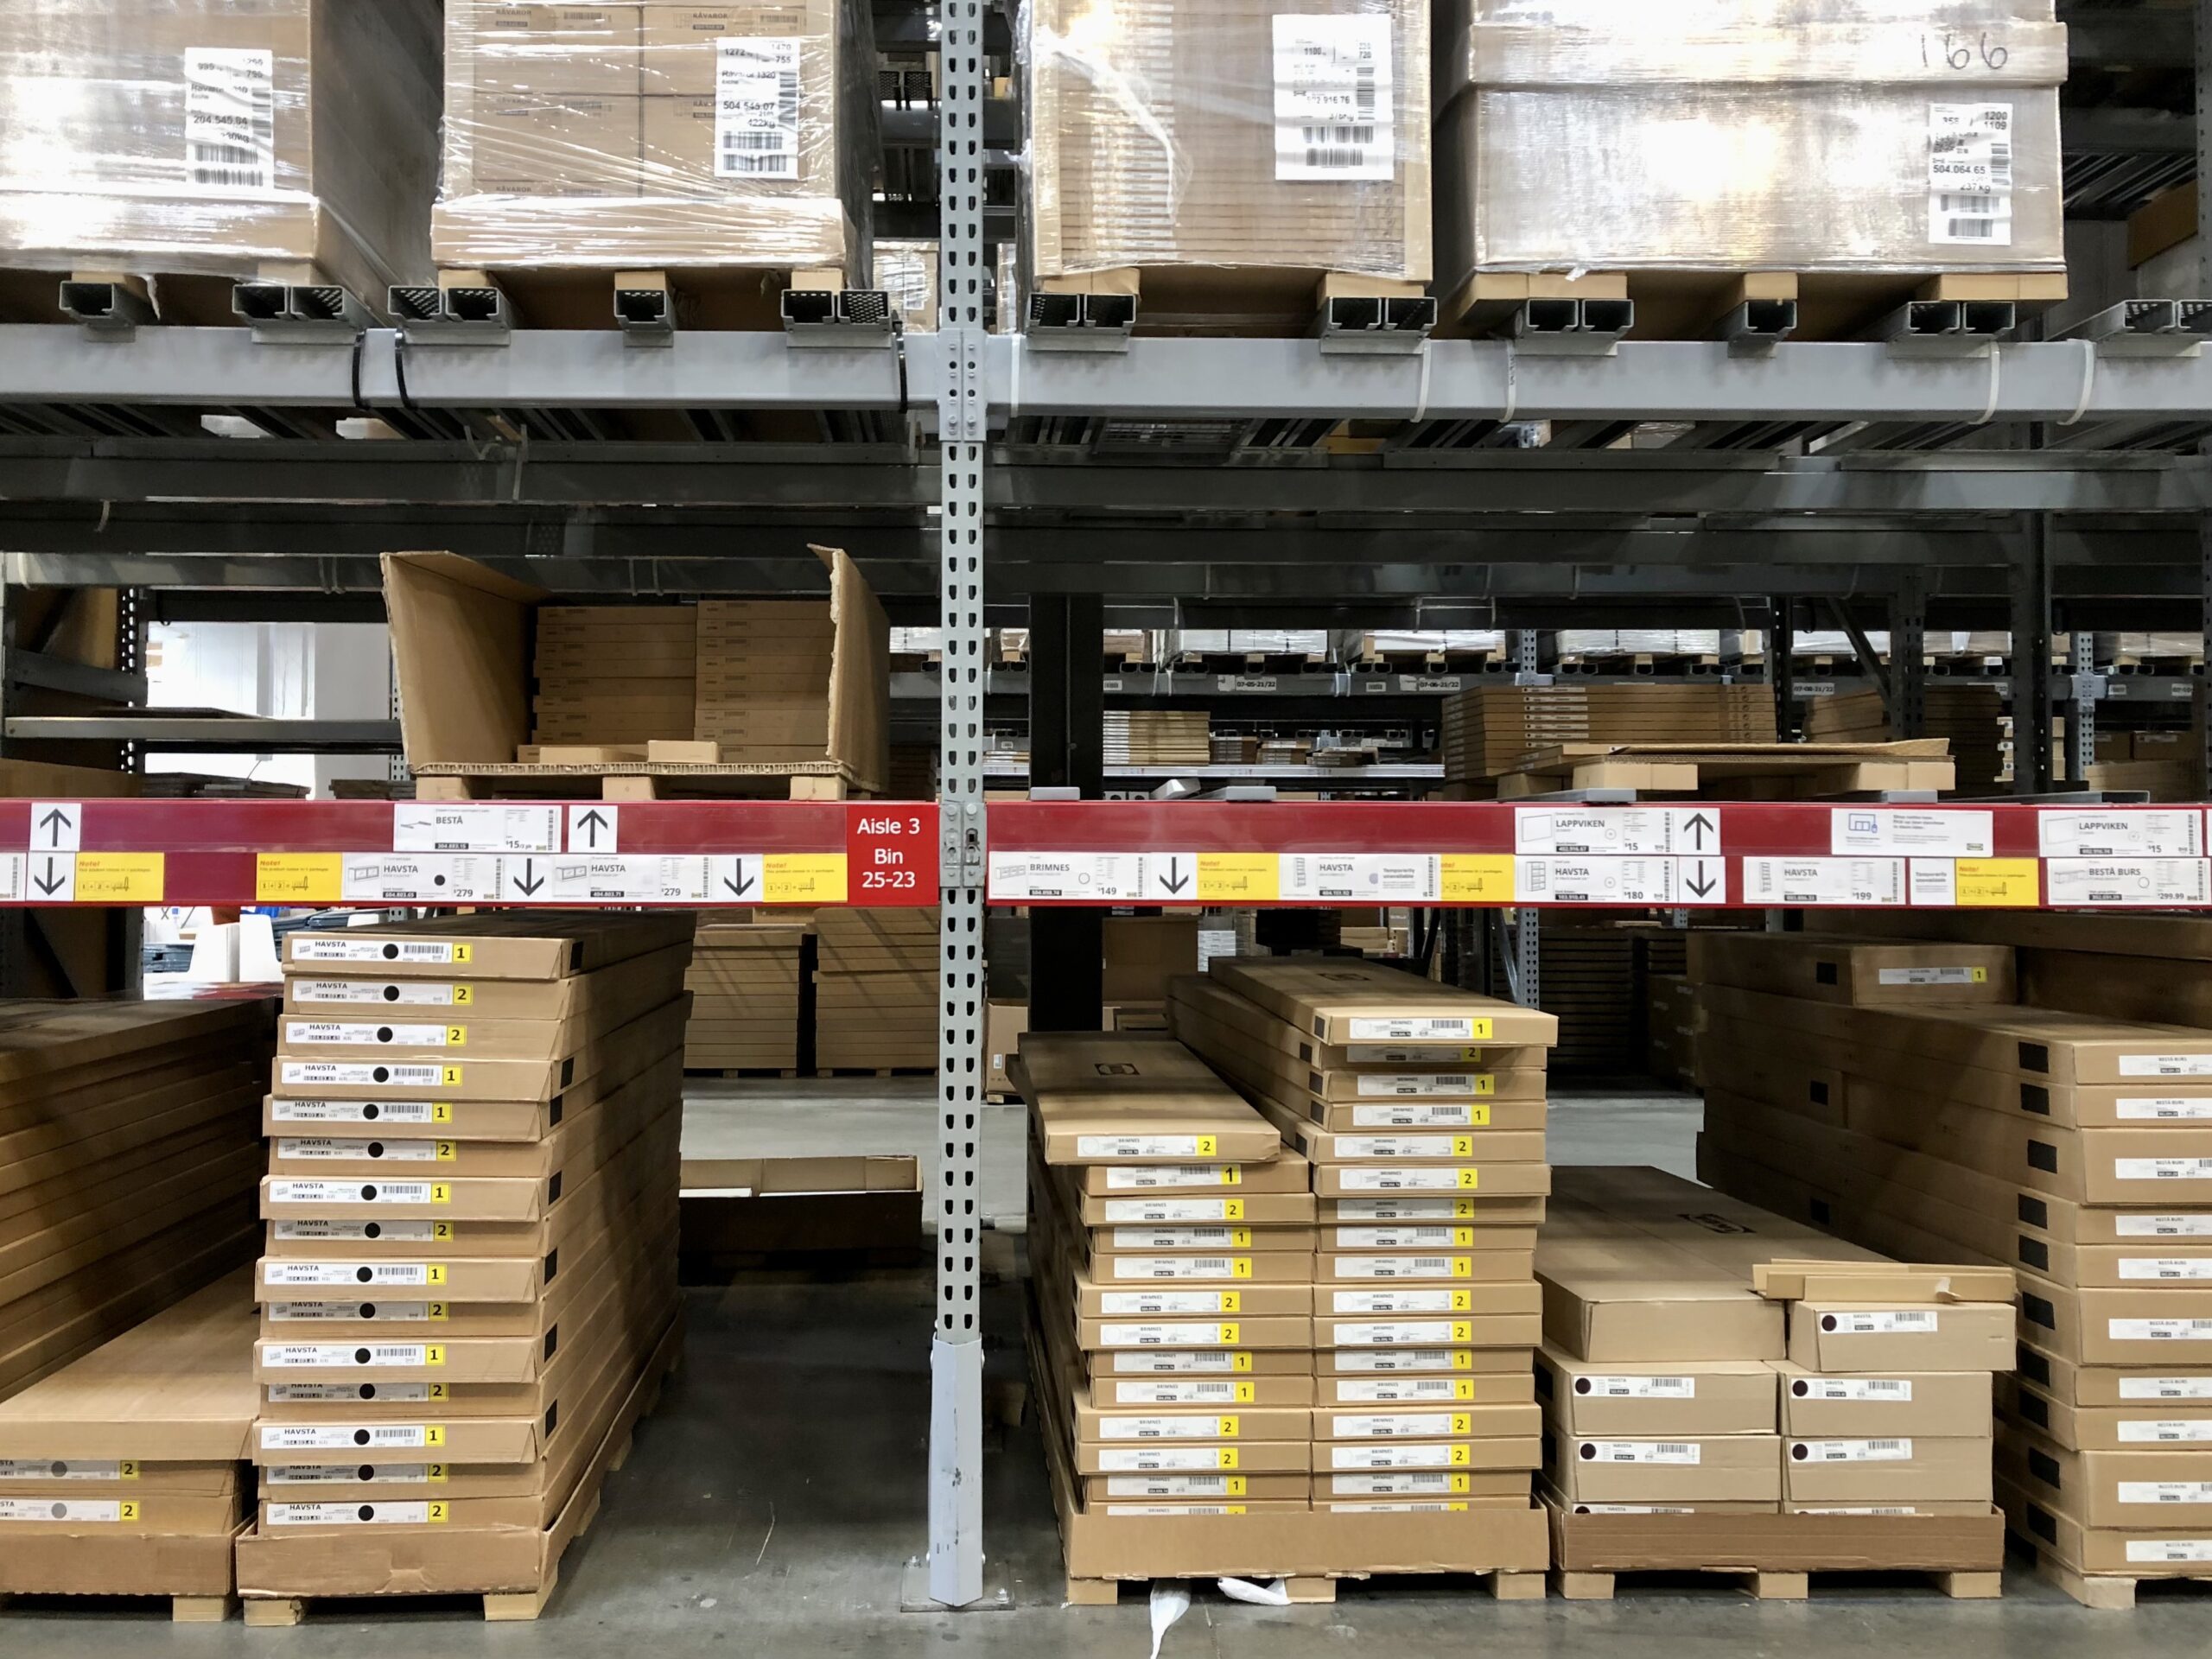 IKEA warehouse boxes stacked